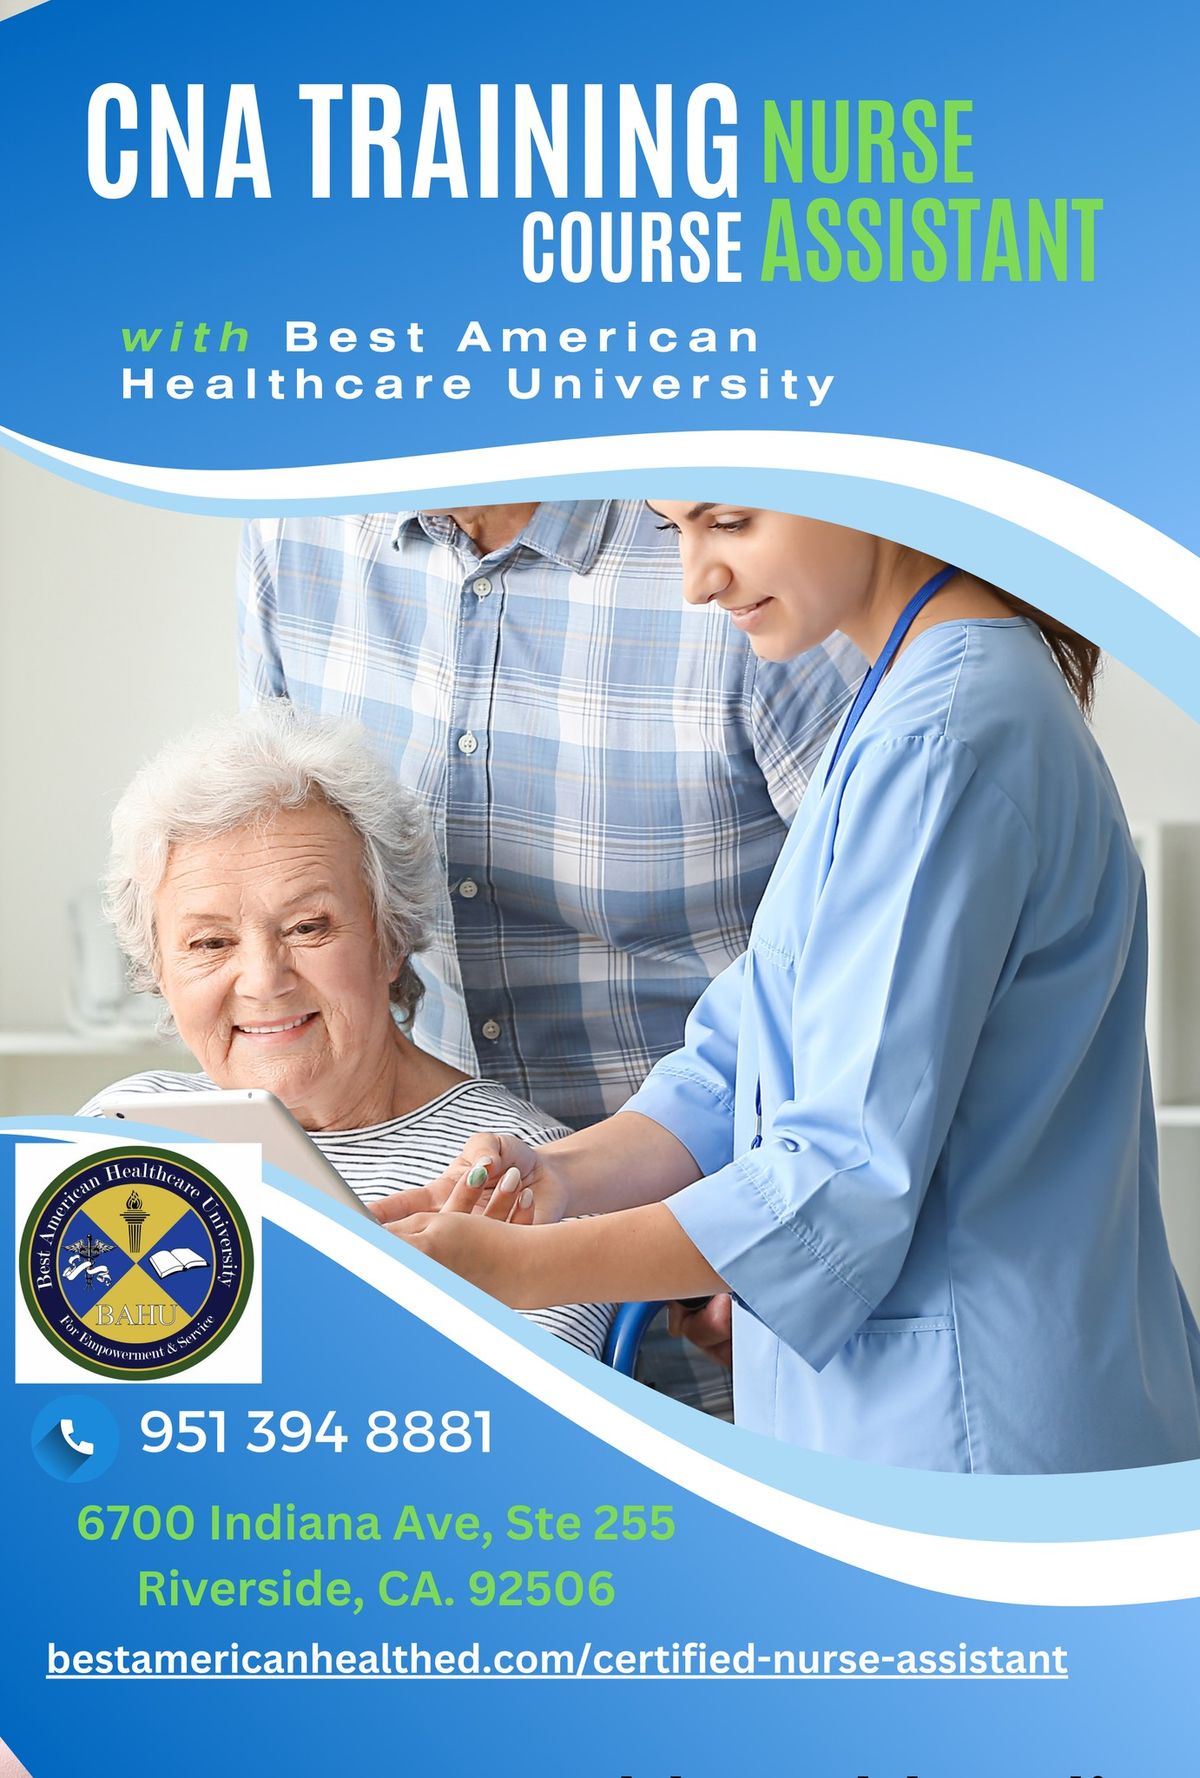 CNA Nurse Assistant Training with Best American Healthcare University